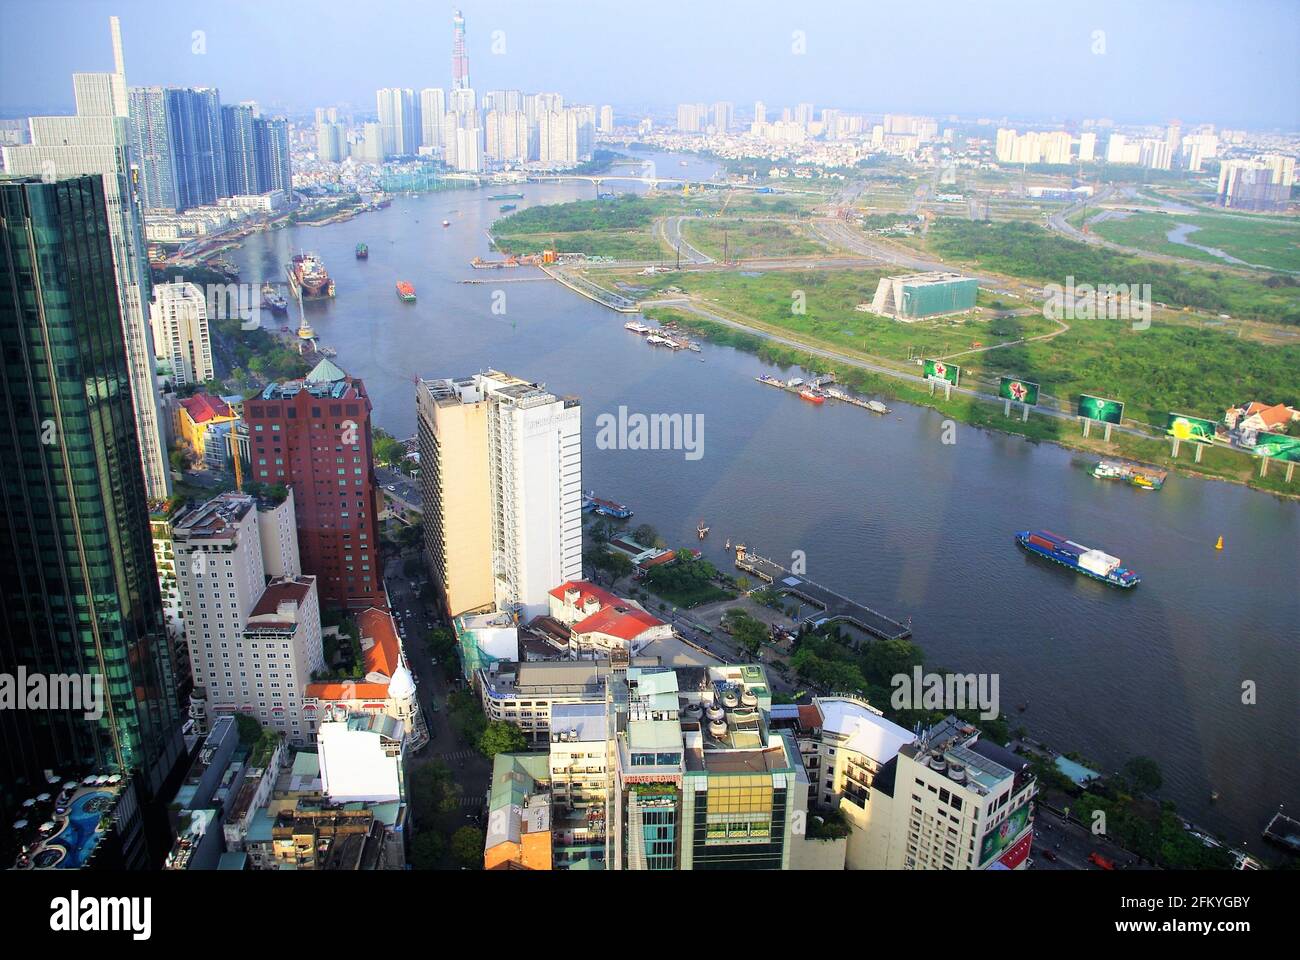 Aerial views of the Saigon River and the city from the 60th floor of the Bitexco Tower, Ho Chi Minh City, Vietnam, Asia Stock Photo